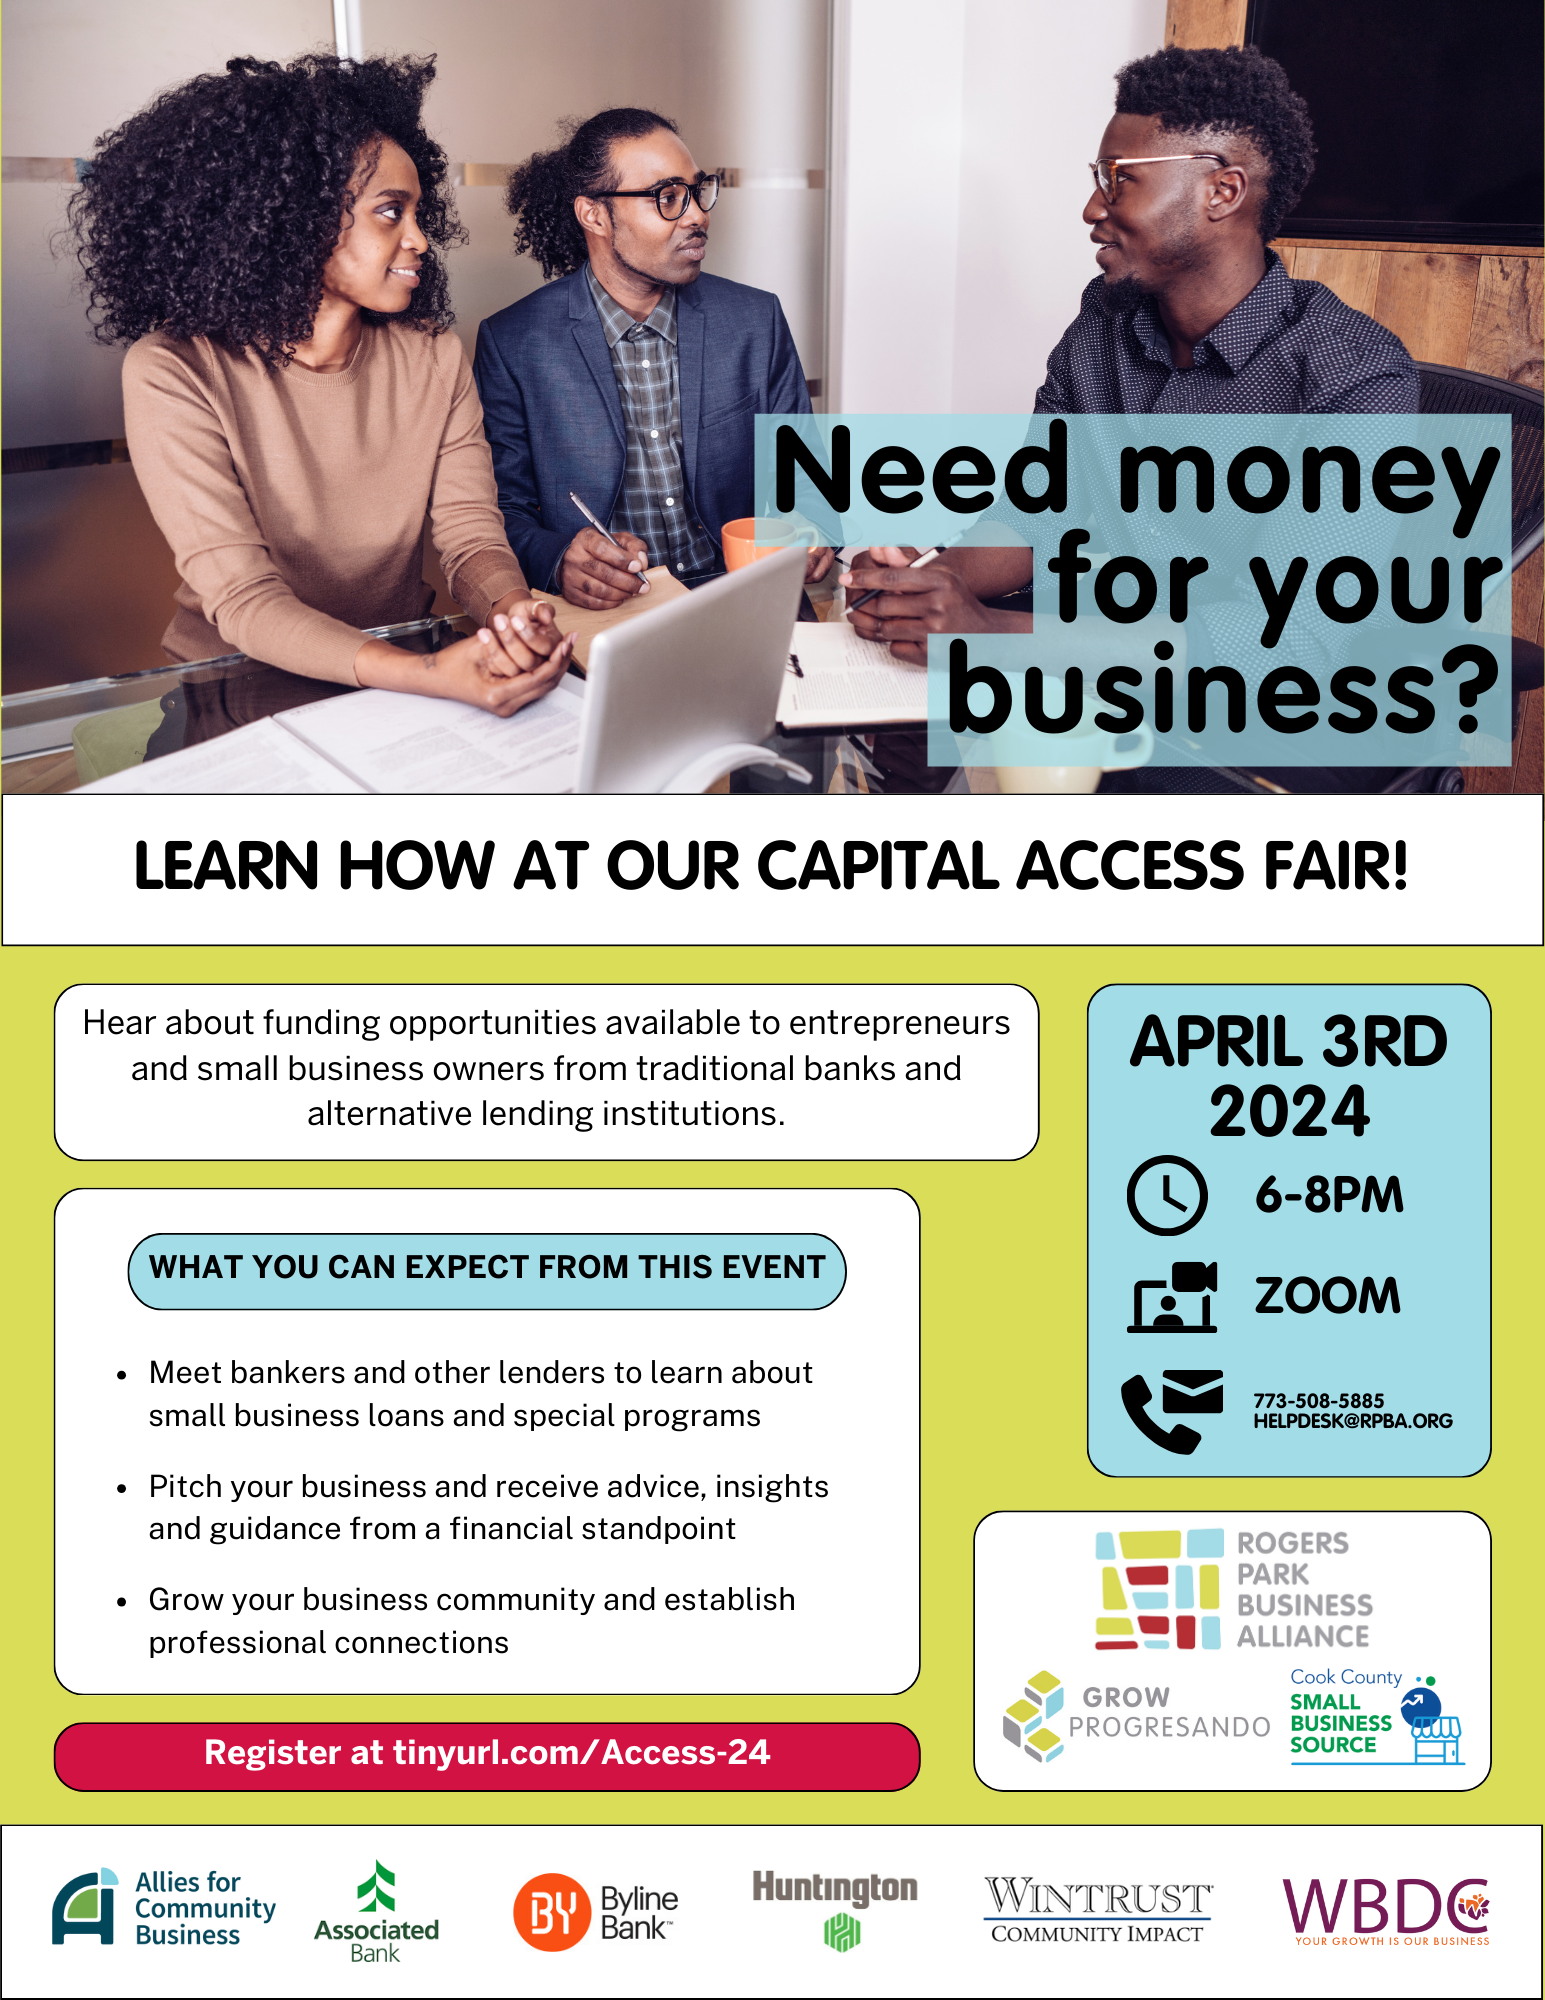 Need money for your business? &#8211; Webinar, rogers-park-business-alliance